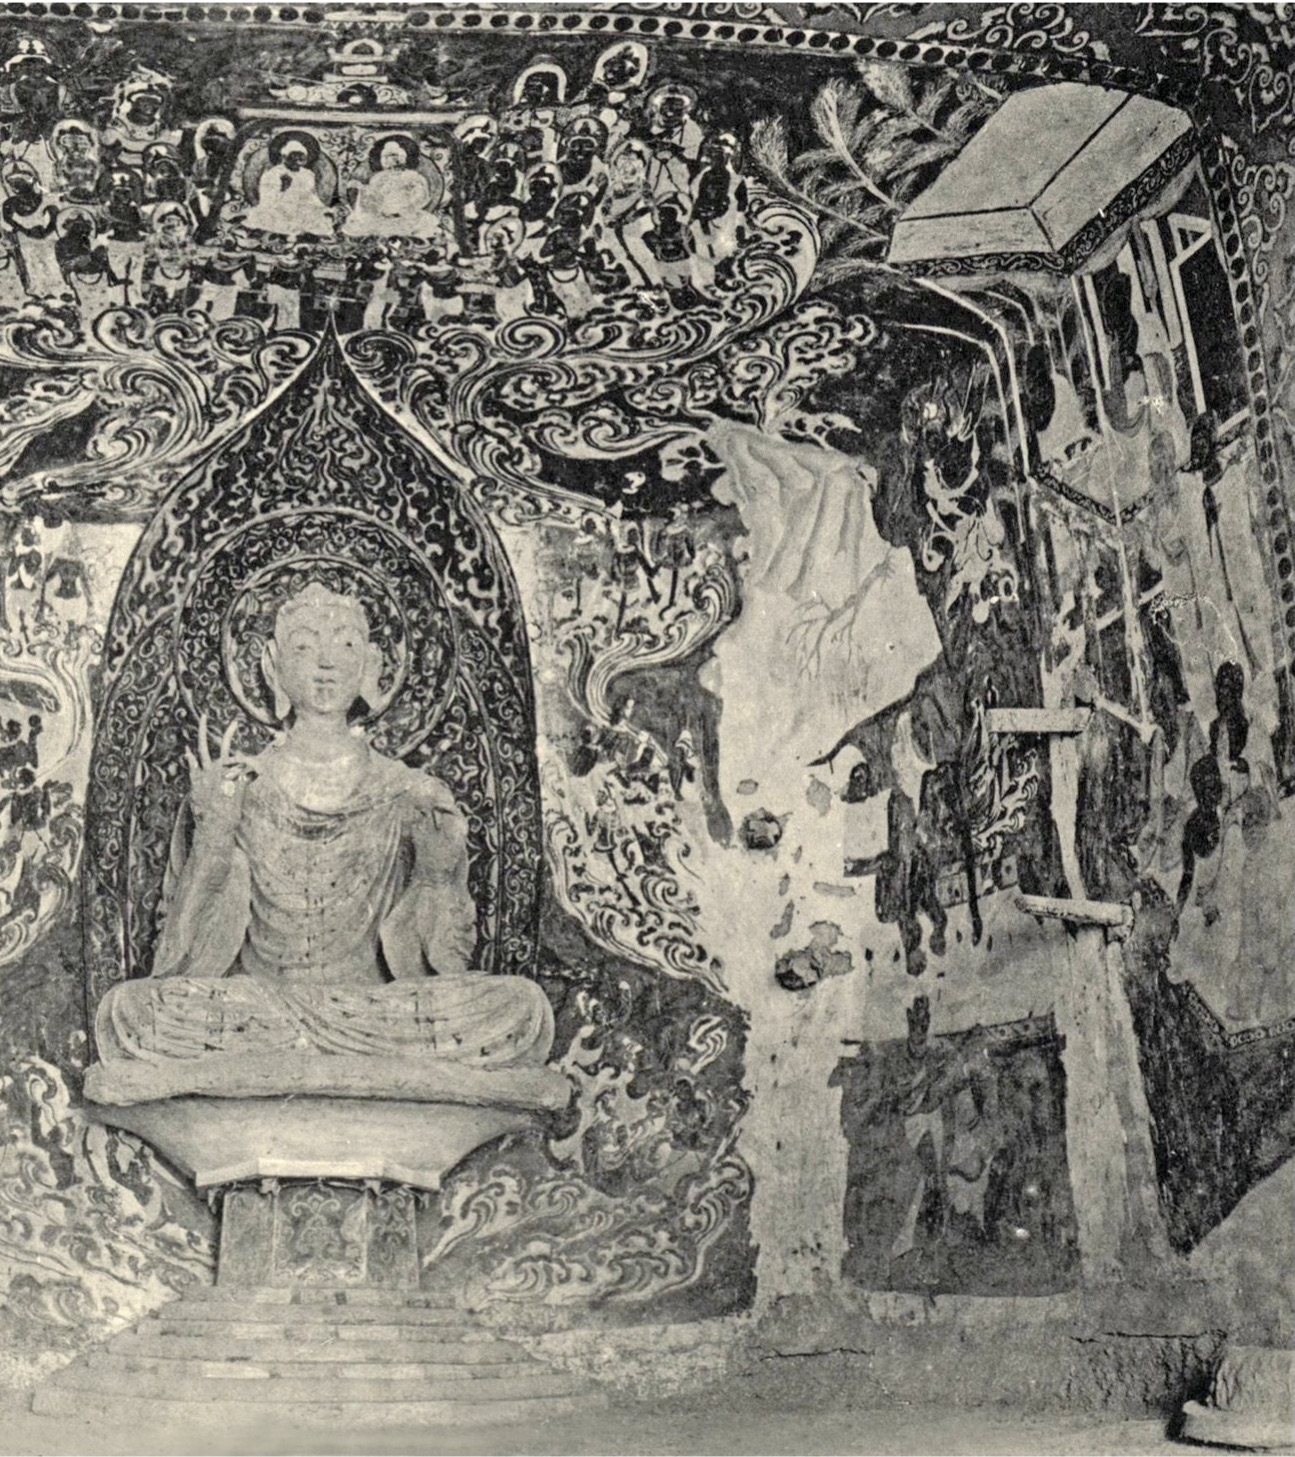 Figure 6: The right half of the fresco "Conquering the Demons" in Cave 335, photographed by Pelliot in 1908